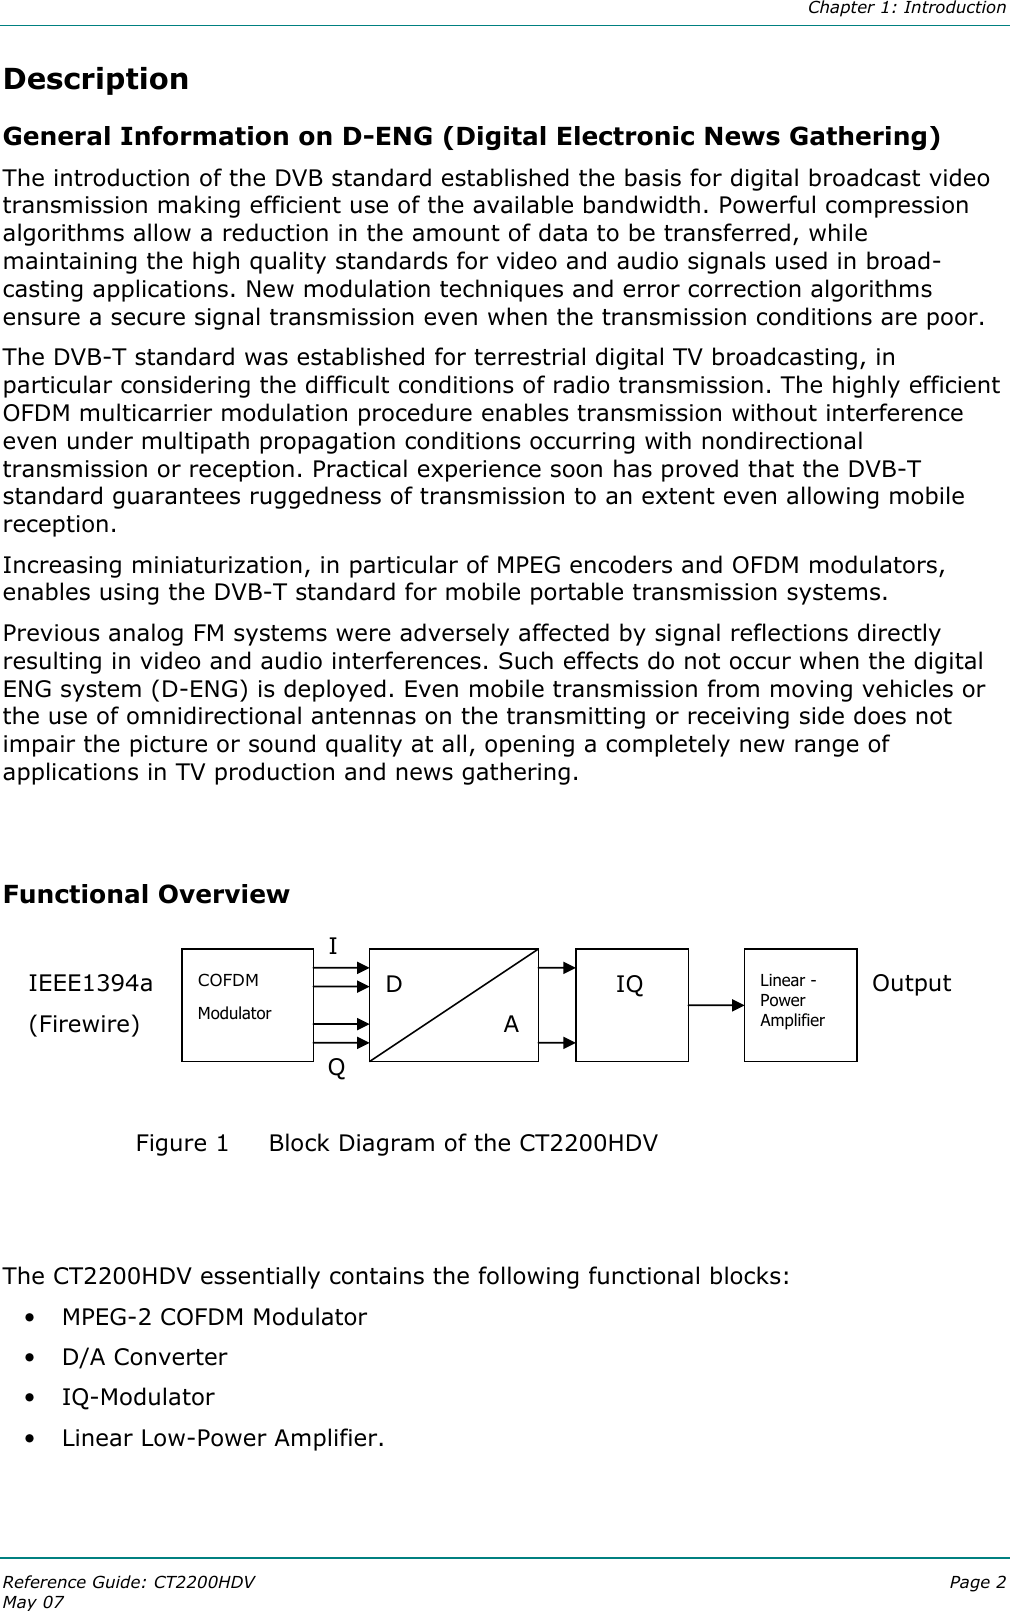  Chapter 1: Introduction Reference Guide: CT2200HDV  Page 2 May 07   Description General Information on D-ENG (Digital Electronic News Gathering) The introduction of the DVB standard established the basis for digital broadcast video transmission making efficient use of the available bandwidth. Powerful compression algorithms allow a reduction in the amount of data to be transferred, while maintaining the high quality standards for video and audio signals used in broad-casting applications. New modulation techniques and error correction algorithms ensure a secure signal transmission even when the transmission conditions are poor. The DVB-T standard was established for terrestrial digital TV broadcasting, in particular considering the difficult conditions of radio transmission. The highly efficient OFDM multicarrier modulation procedure enables transmission without interference even under multipath propagation conditions occurring with nondirectional transmission or reception. Practical experience soon has proved that the DVB-T standard guarantees ruggedness of transmission to an extent even allowing mobile reception. Increasing miniaturization, in particular of MPEG encoders and OFDM modulators, enables using the DVB-T standard for mobile portable transmission systems.  Previous analog FM systems were adversely affected by signal reflections directly resulting in video and audio interferences. Such effects do not occur when the digital ENG system (D-ENG) is deployed. Even mobile transmission from moving vehicles or the use of omnidirectional antennas on the transmitting or receiving side does not impair the picture or sound quality at all, opening a completely new range of applications in TV production and news gathering.   Functional Overview      Figure 1 Block Diagram of the CT2200HDV   The CT2200HDV essentially contains the following functional blocks: • MPEG-2 COFDM Modulator • D/A Converter • IQ-Modulator • Linear Low-Power Amplifier.   IEEE1394a (Firewire)  COFDM Modulator D     A I Q    IQ  Linear - Power Amplifier Output  